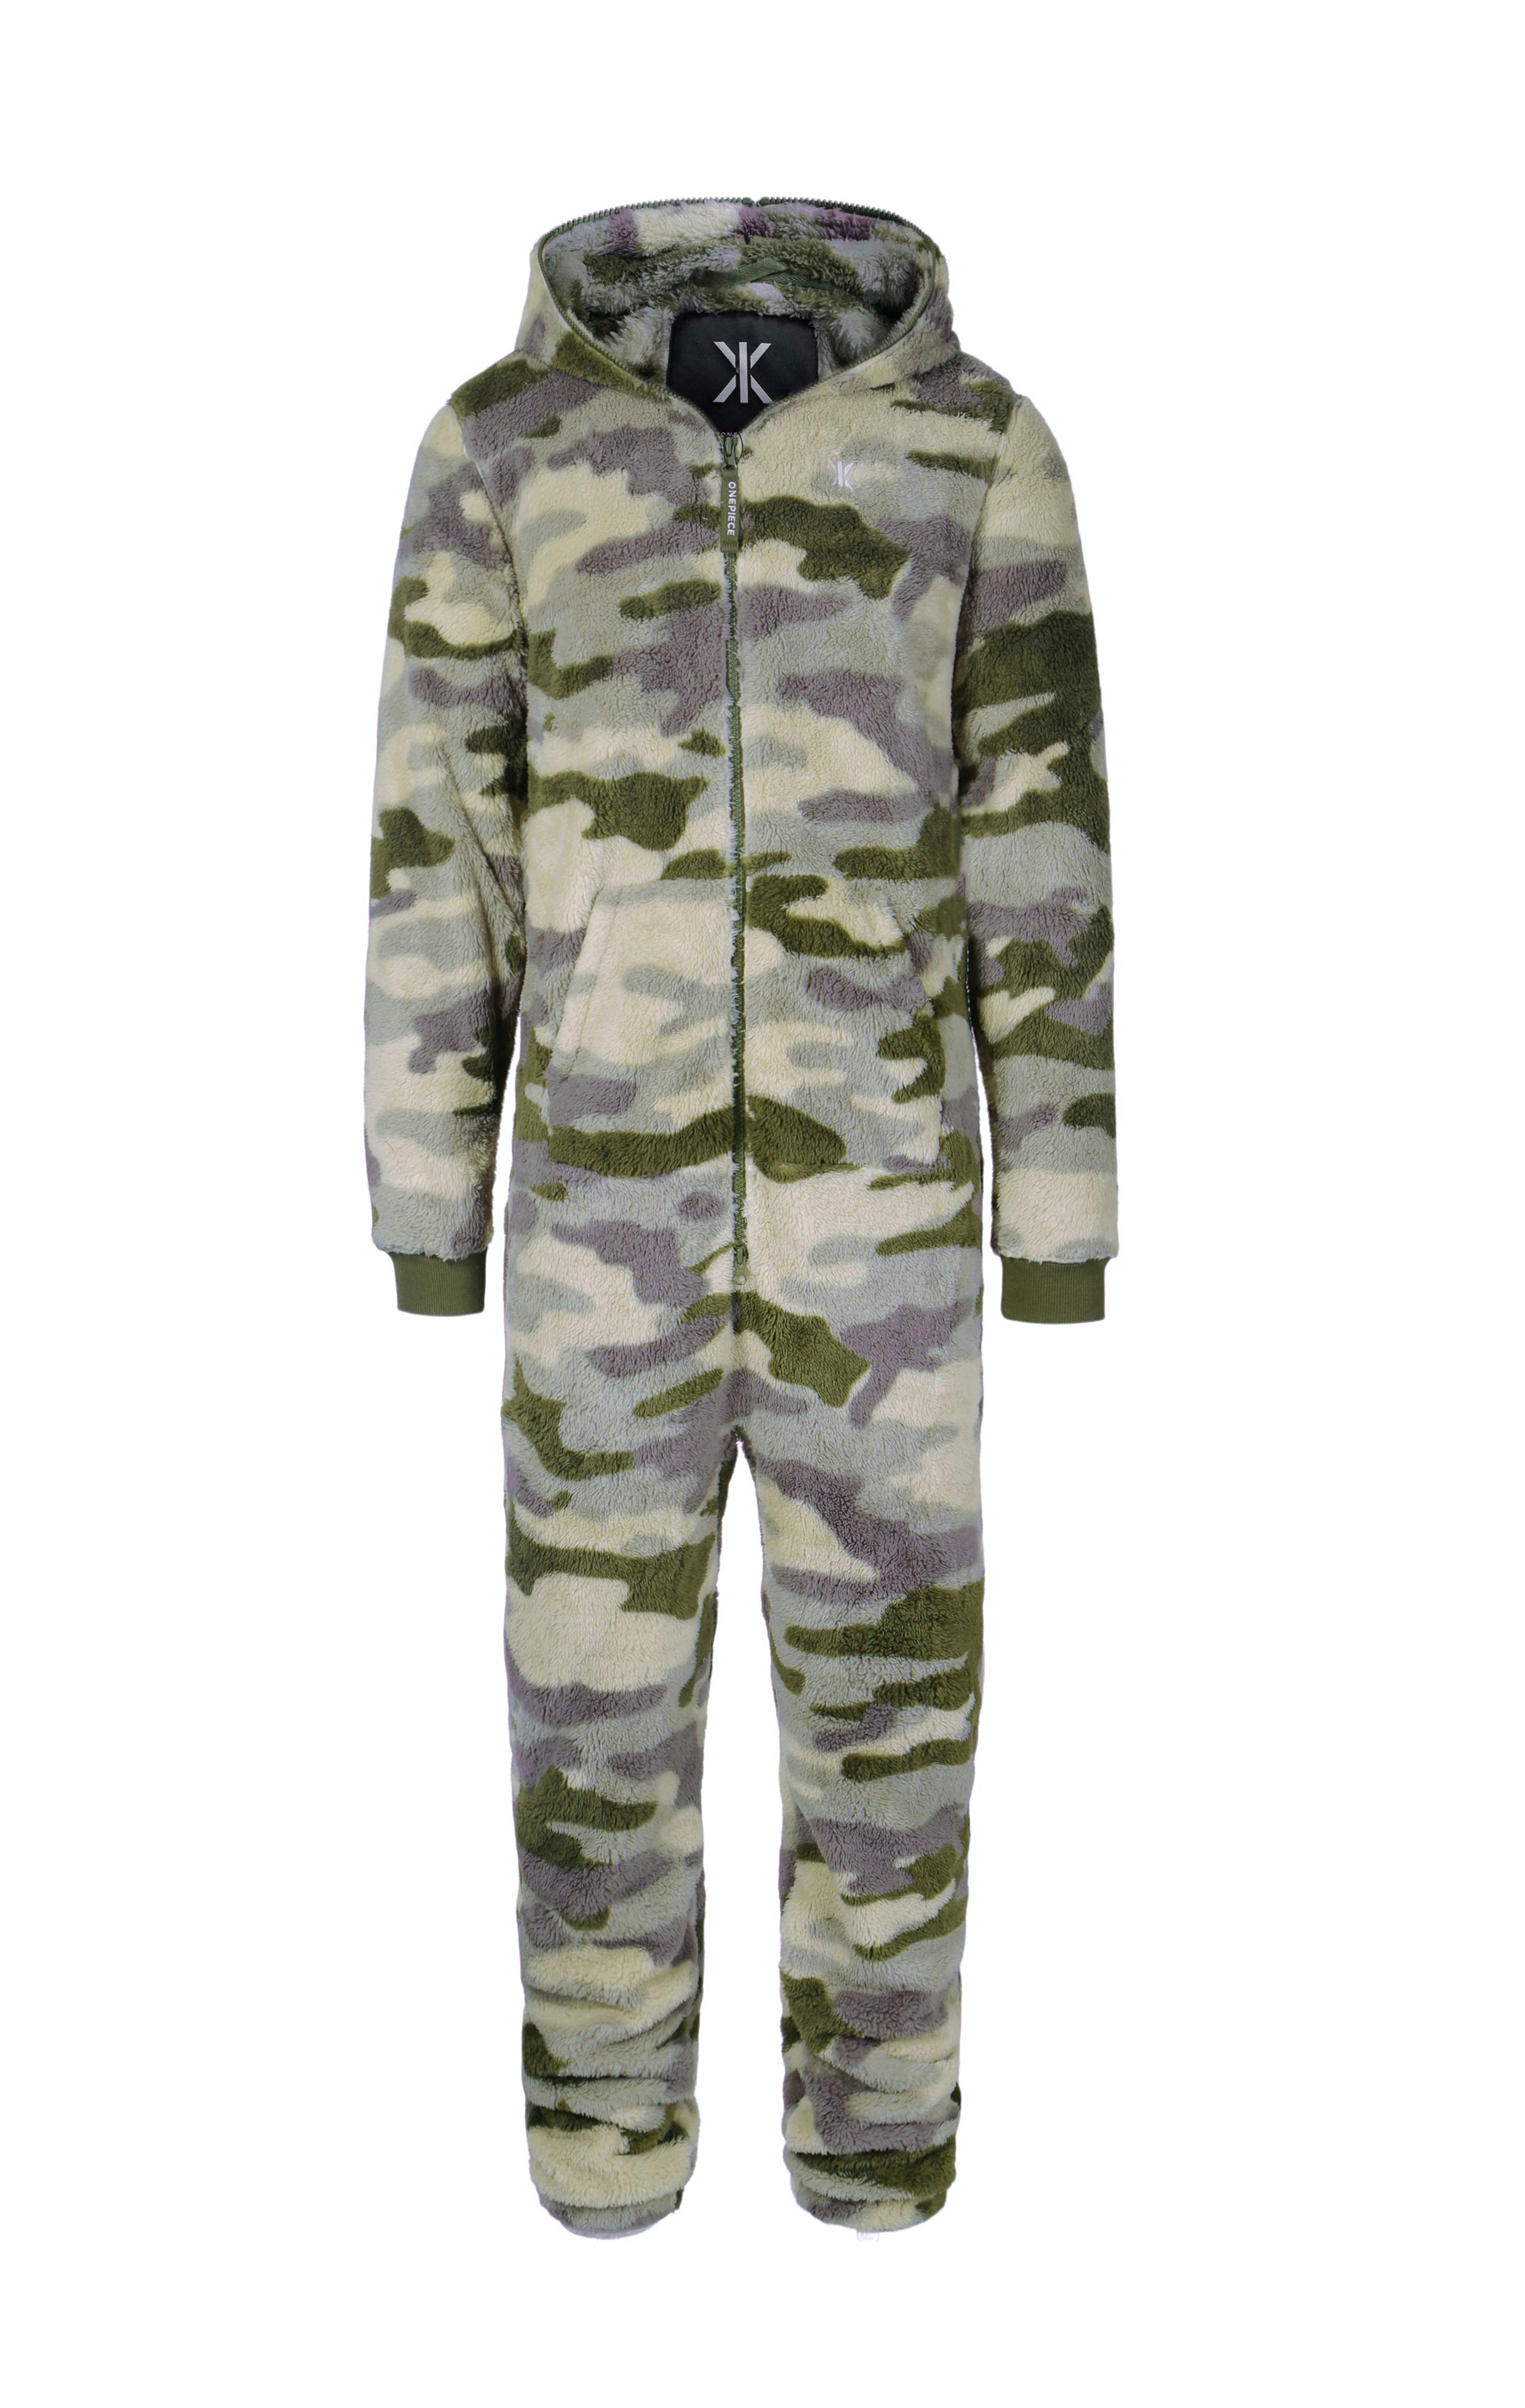 Onepiece The New Puppy Jumpsuit Army Camo - 1